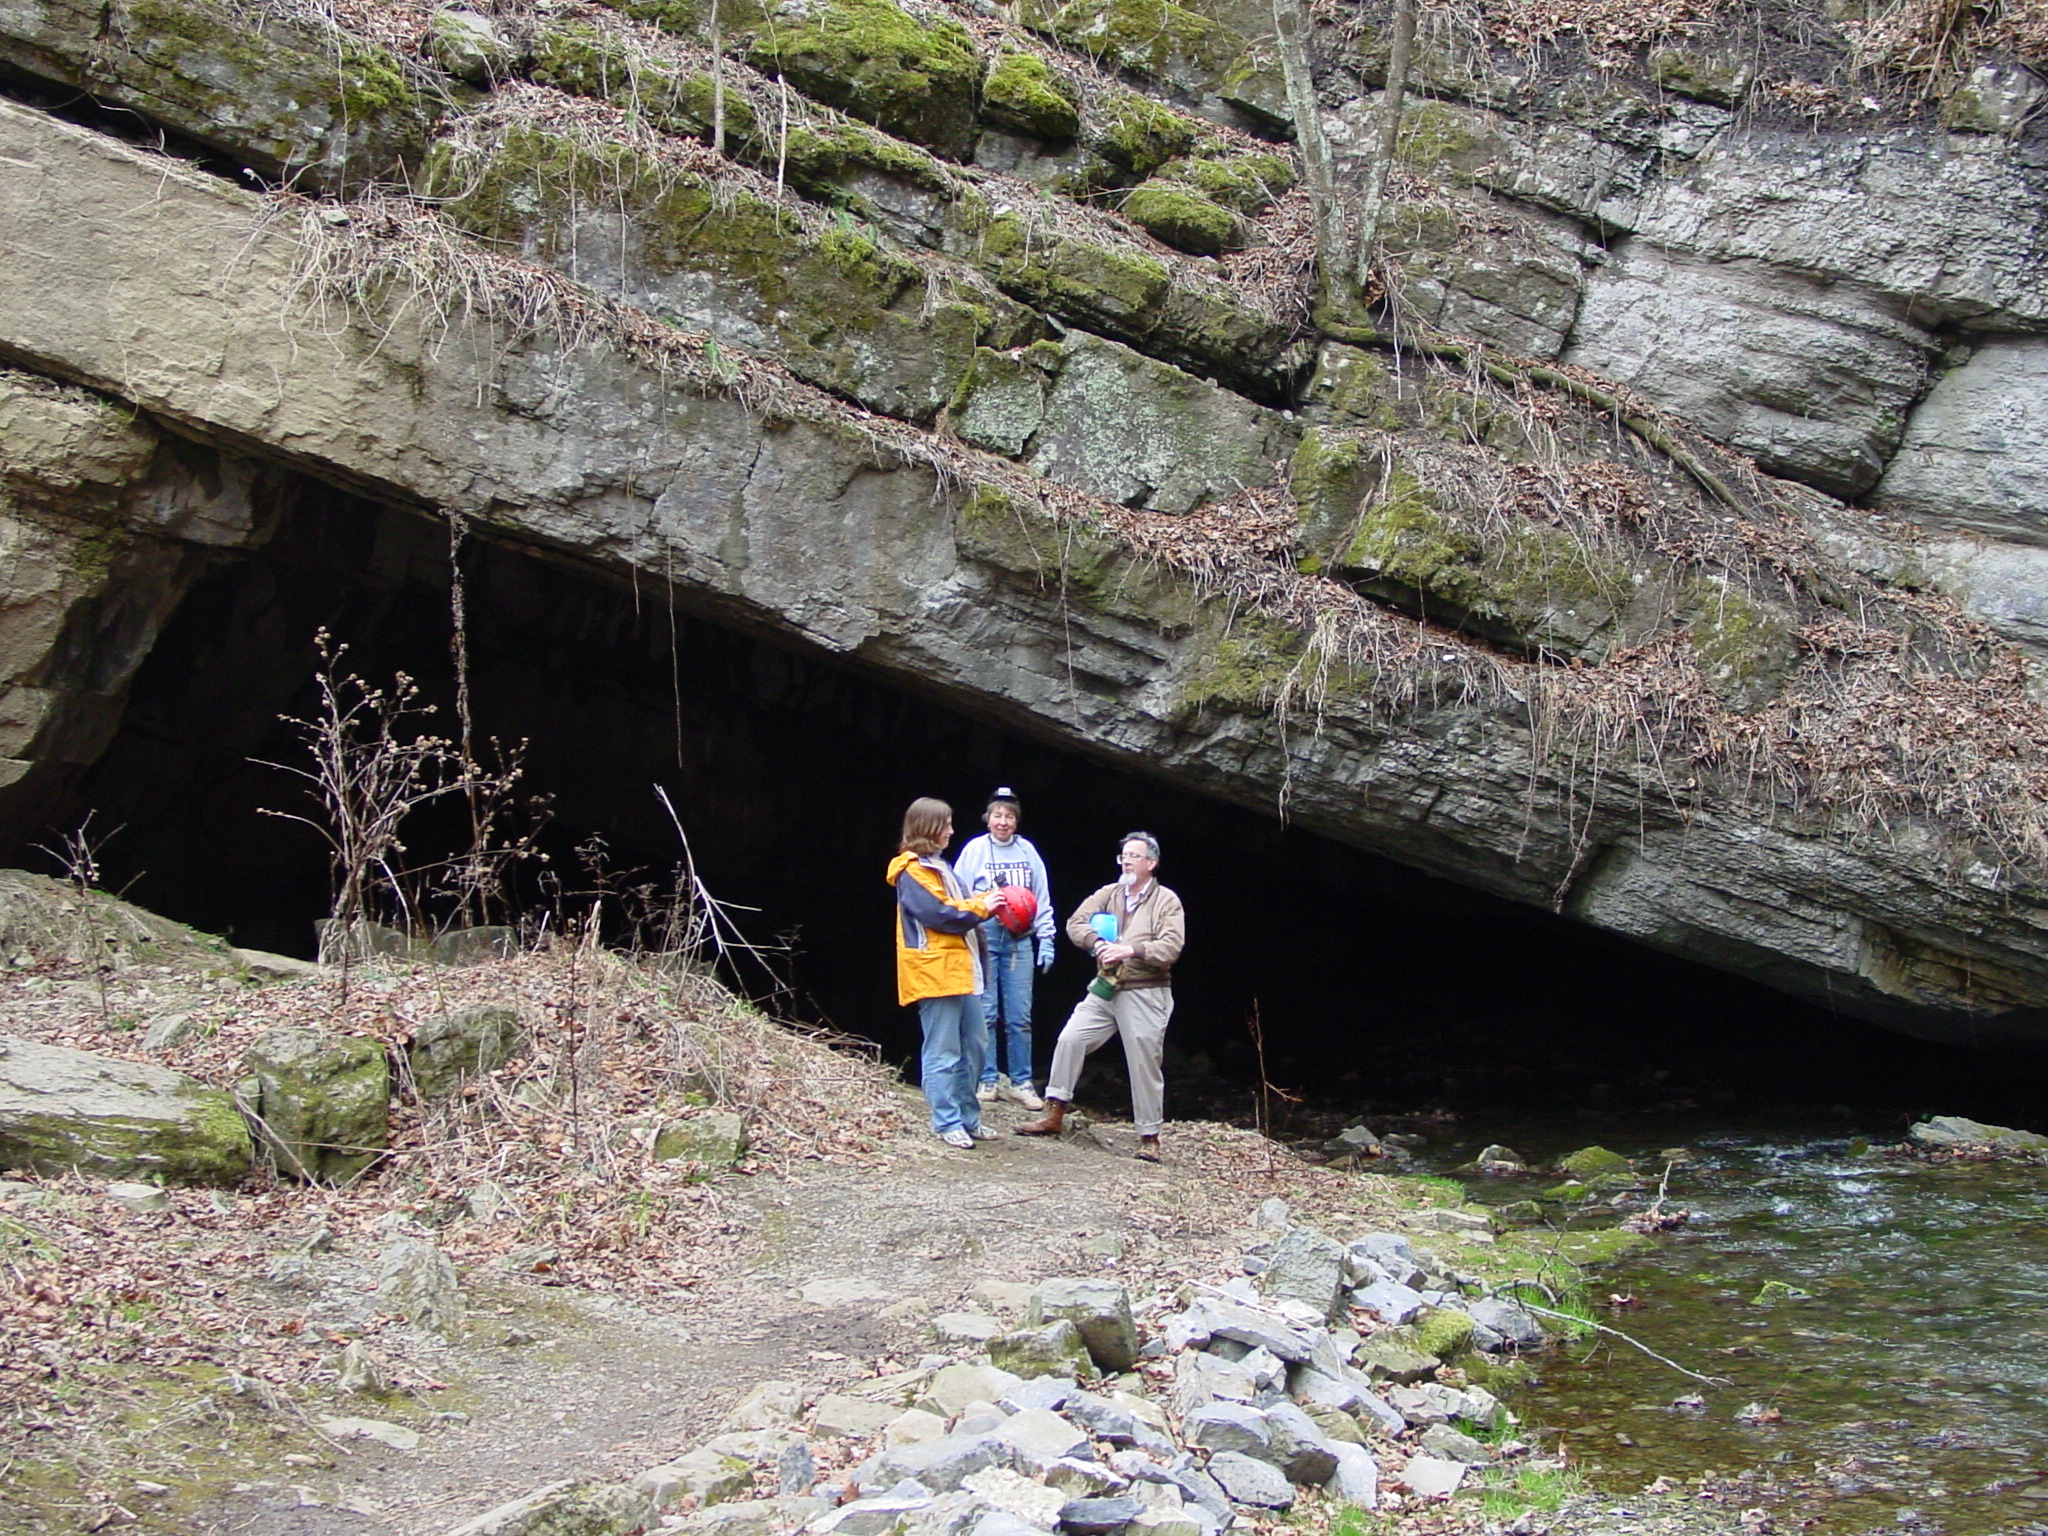 Will and Bet White lead a cave tour. Tytoona cave entrance is a fenster, the underground route of Sinking Creek.  Has been explored to 300 m, about ¼ the distance to Arch Spring.  There are additional siphons.  Can look at sediment in the entrance of the cave